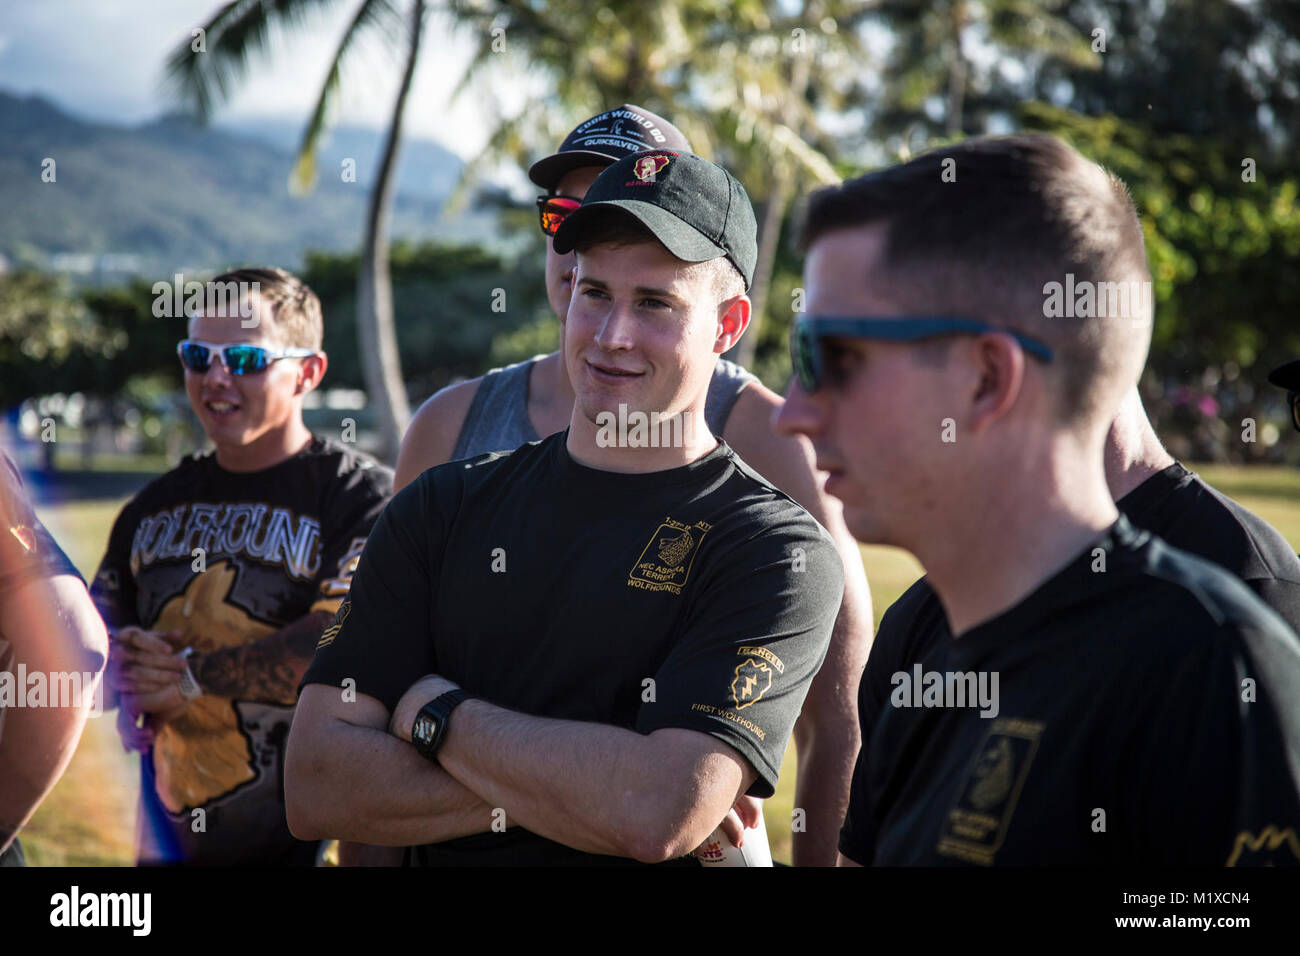 U.S. Army 1st. Lt. Nicholas Keeley, assigned to 1st Battalion, 27th Infantry Regiment, 2nd Infantry Brigade Combat Team, 25th Infantry Division listens to group introductions before the start of the team-building exercise in Keehi Lagoon, Honolulu, Hi., Jan. 30, 2018. In an effort to strengthen international relationships, United States Army Pacific hosted personnel from the British Army to participate in a team building exercise facilitating outrigger canoeing. (U.S. Army Stock Photo